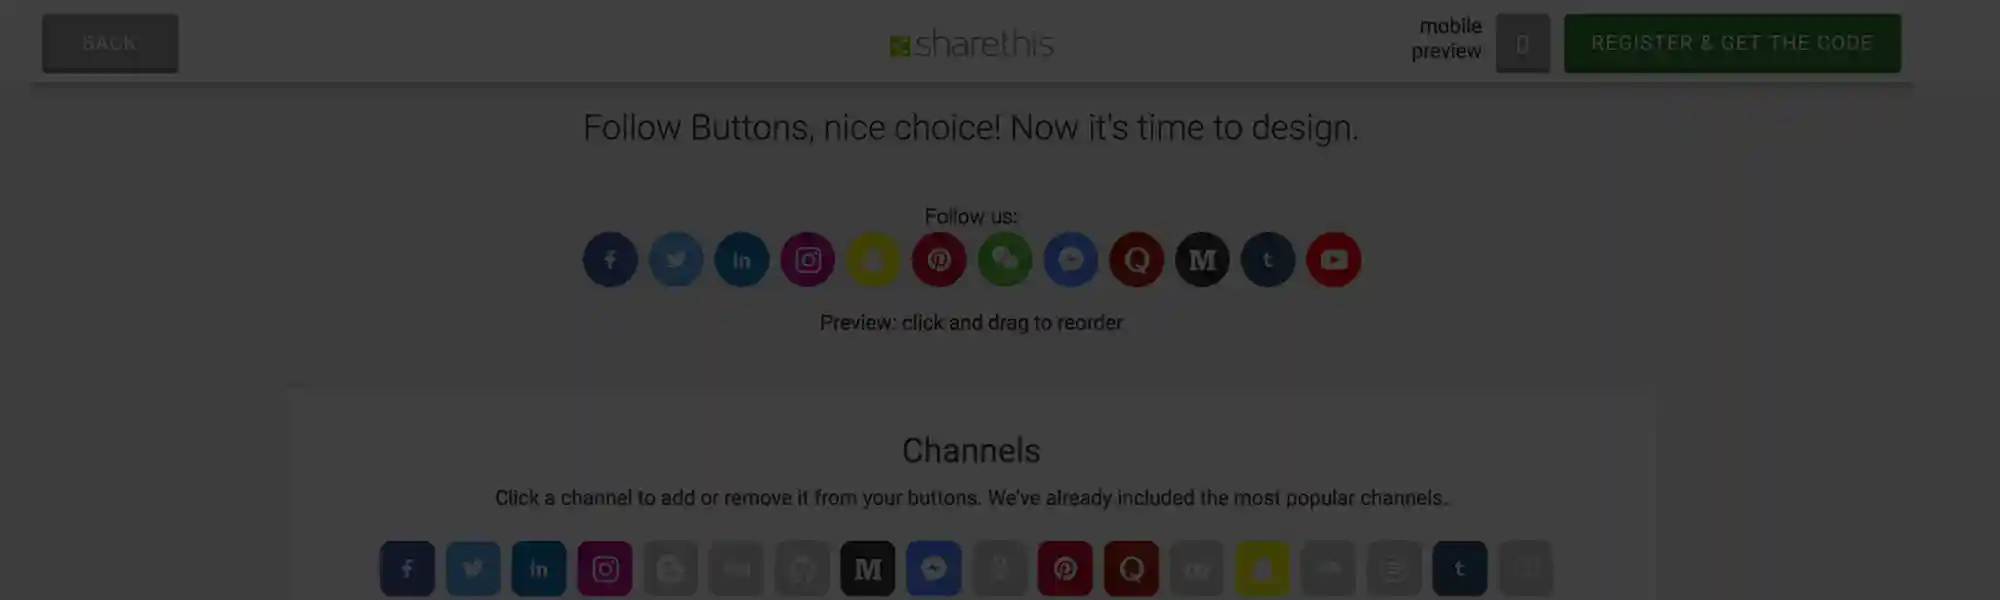 Introducing ShareThis follow buttons: Beautiful, quick to install, and easy to configure